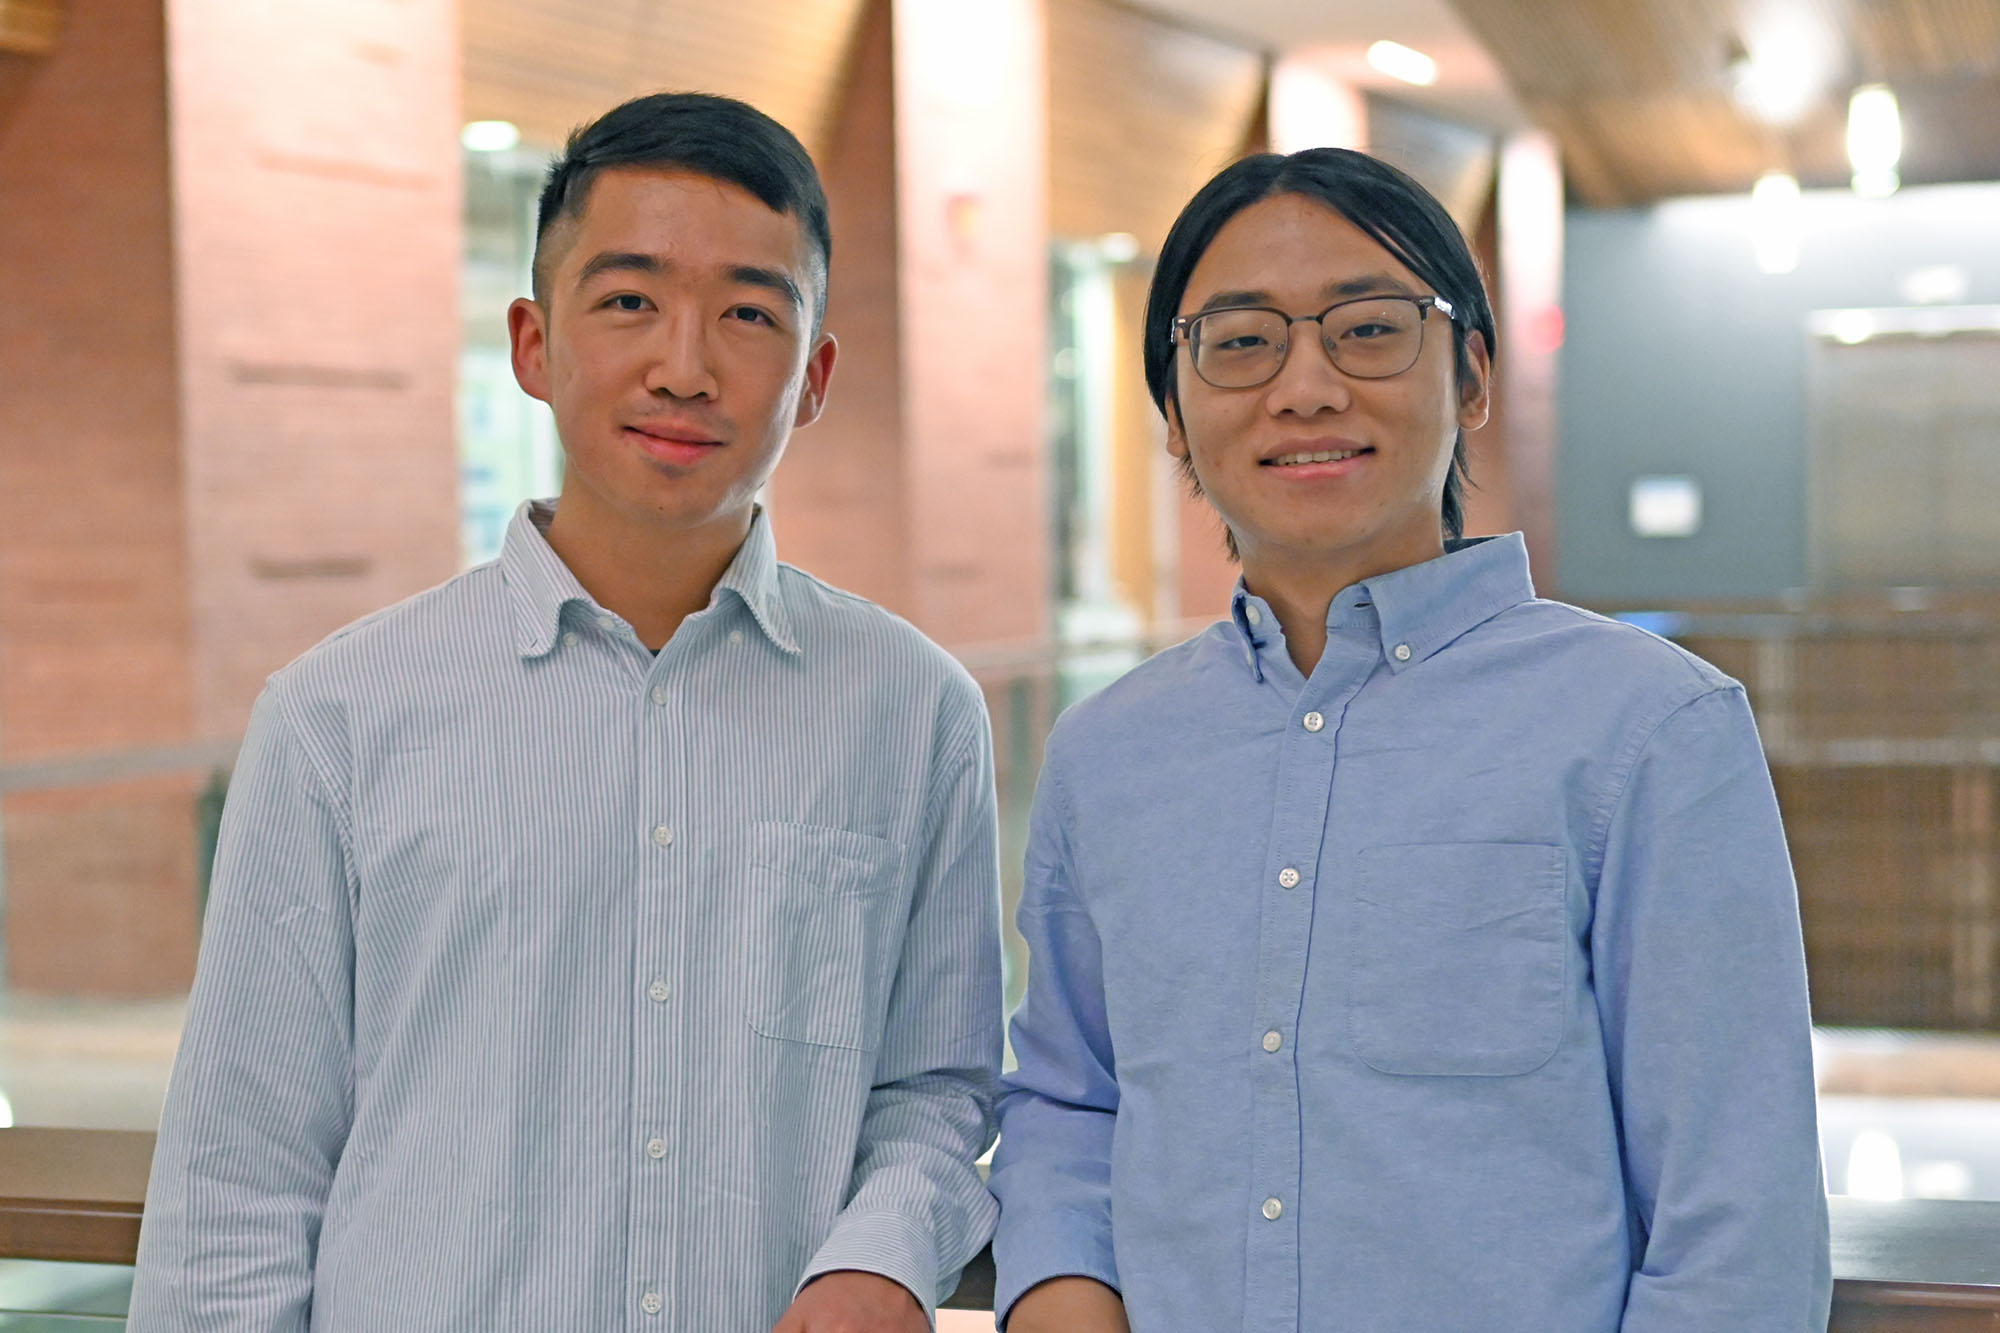 Two men dressed in two shades of light blue Oxford shirt, stand side by side, slightly smiling for the photographer.